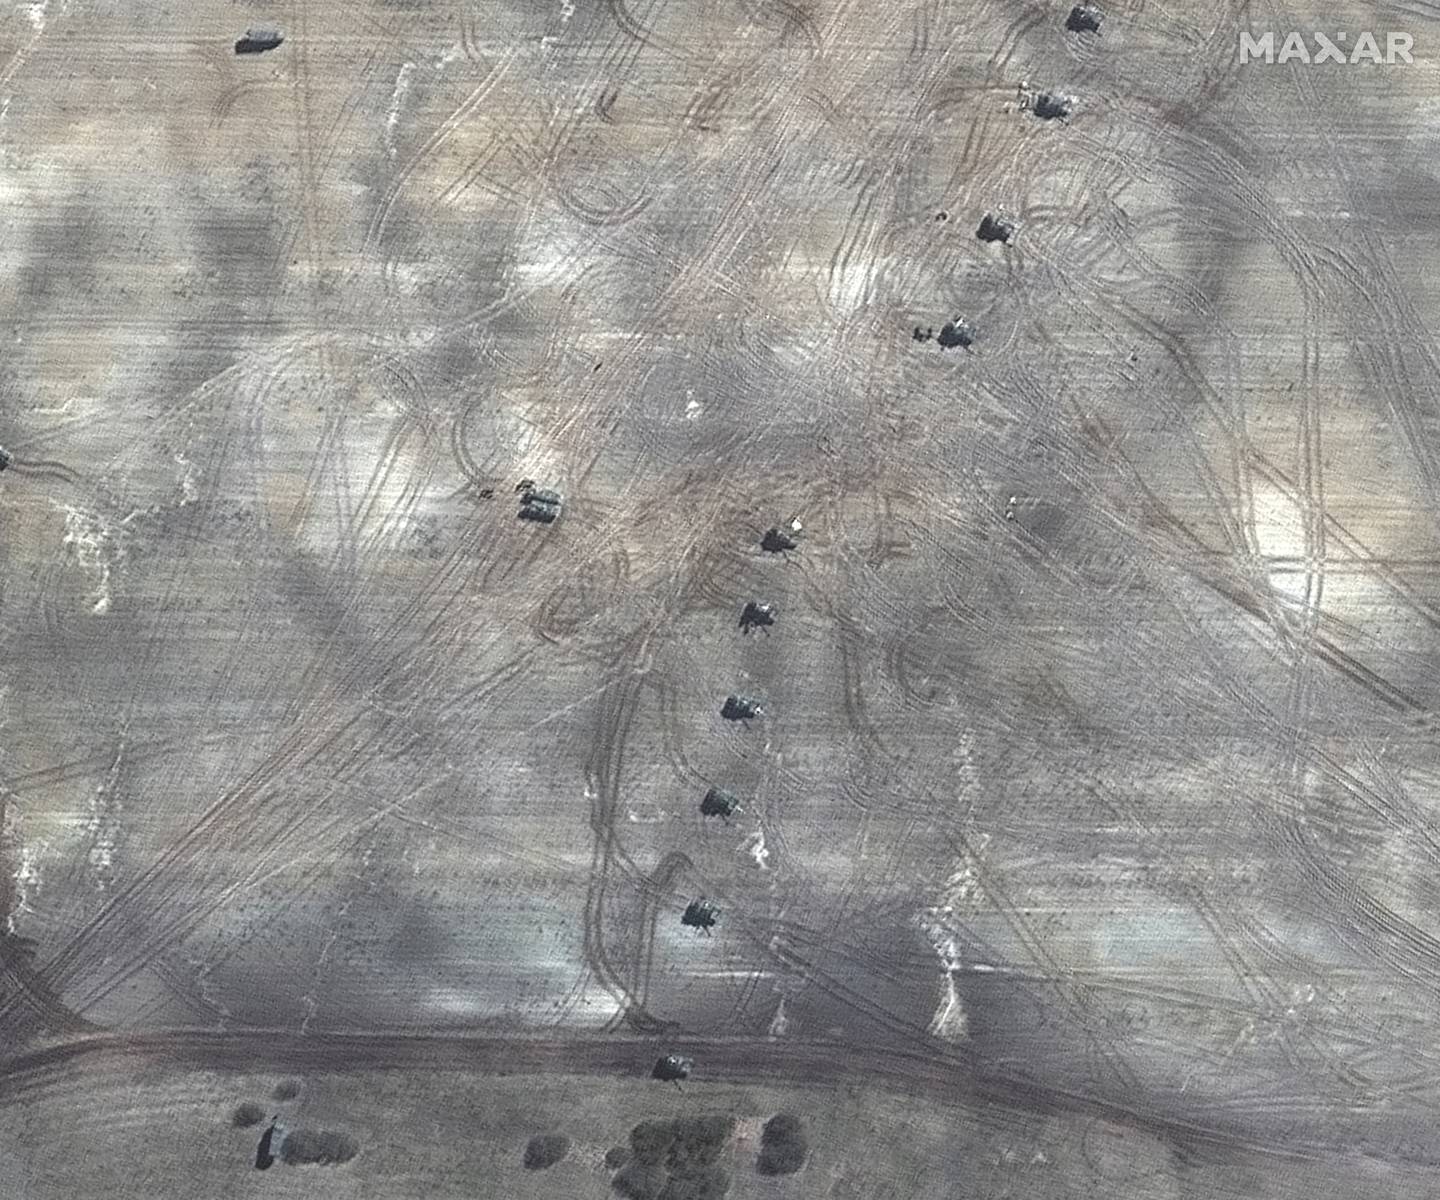 A satellite image shows a close up of self-propelled howitzers, northeast of Chernihiv, Ukraine, March 16, 2022.  Satellite image ©2022 Maxar Technologies/Handout via REUTERS 